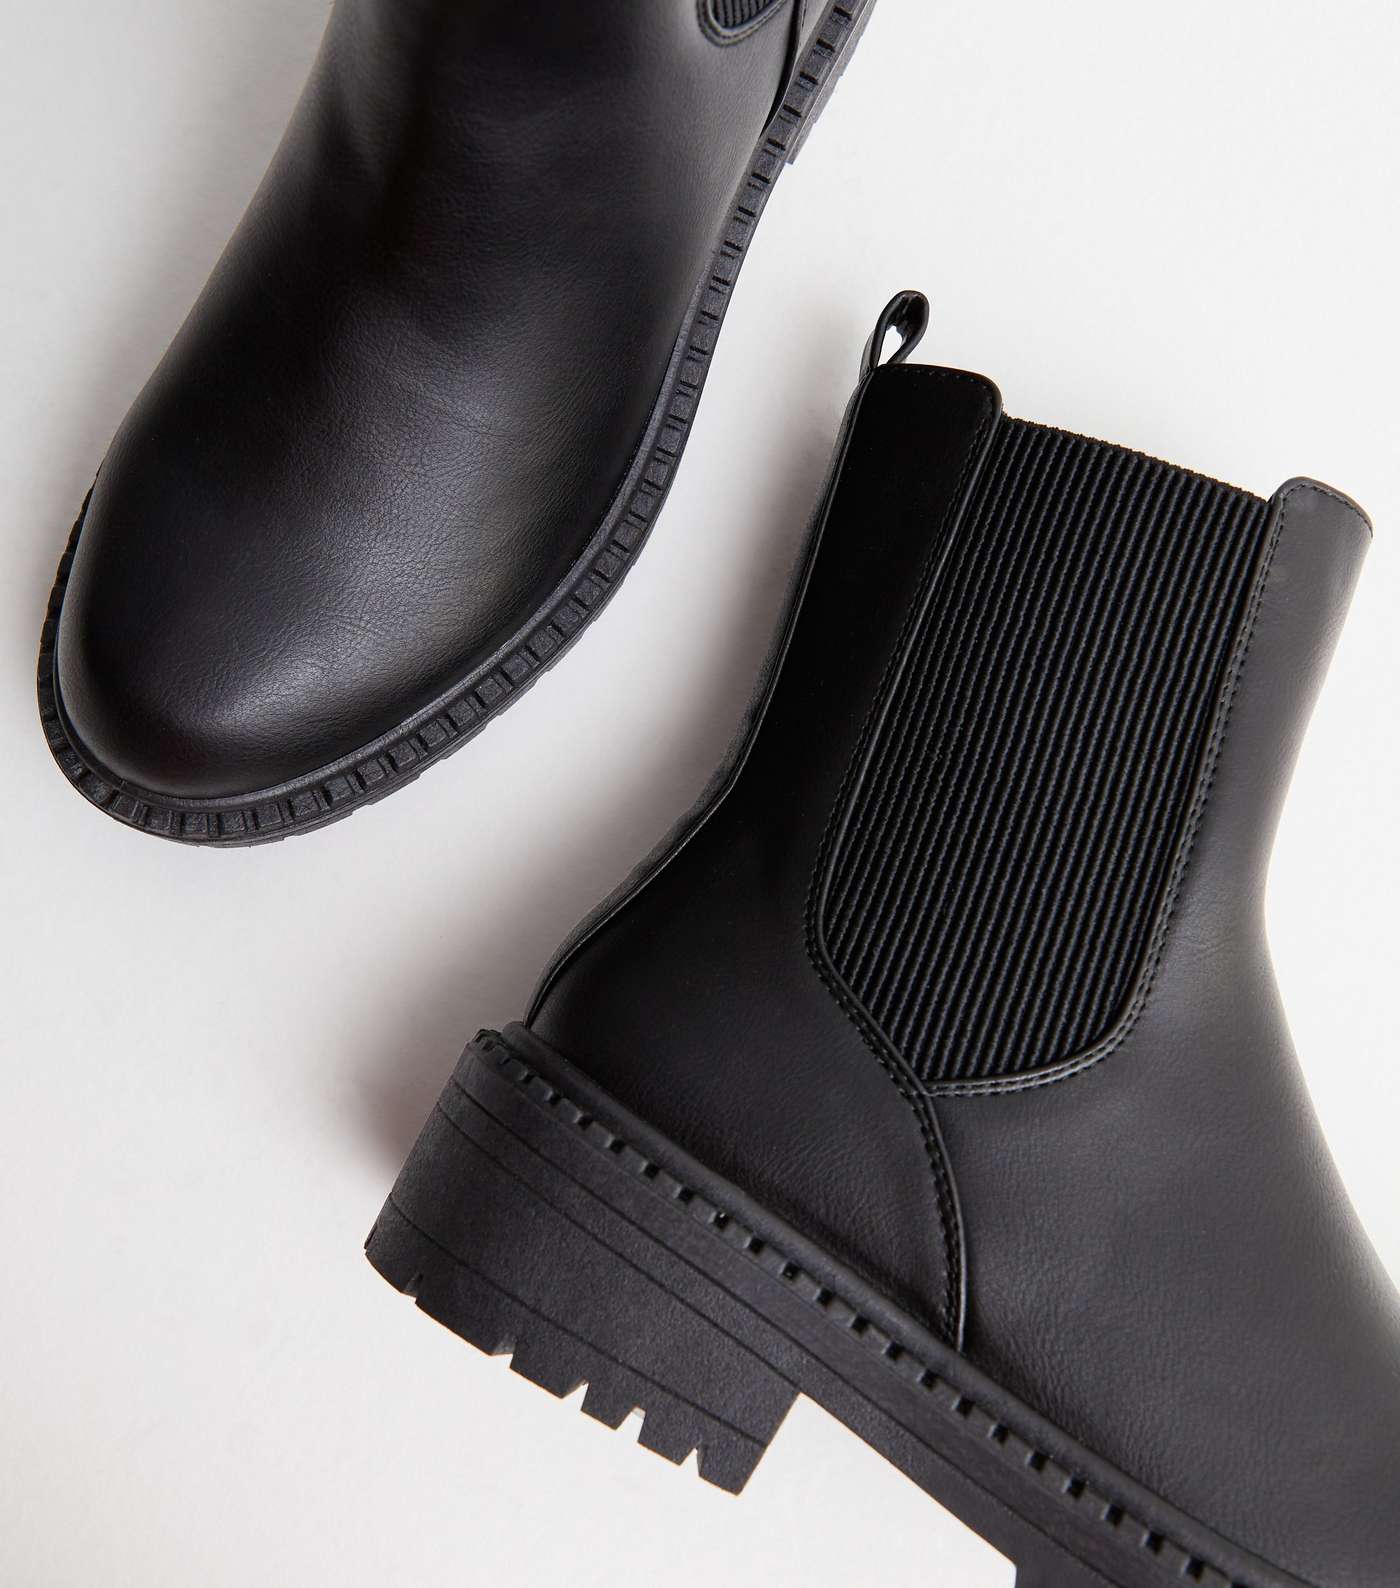 Black Leather-Look Chunky Chelsea Boots Image 4